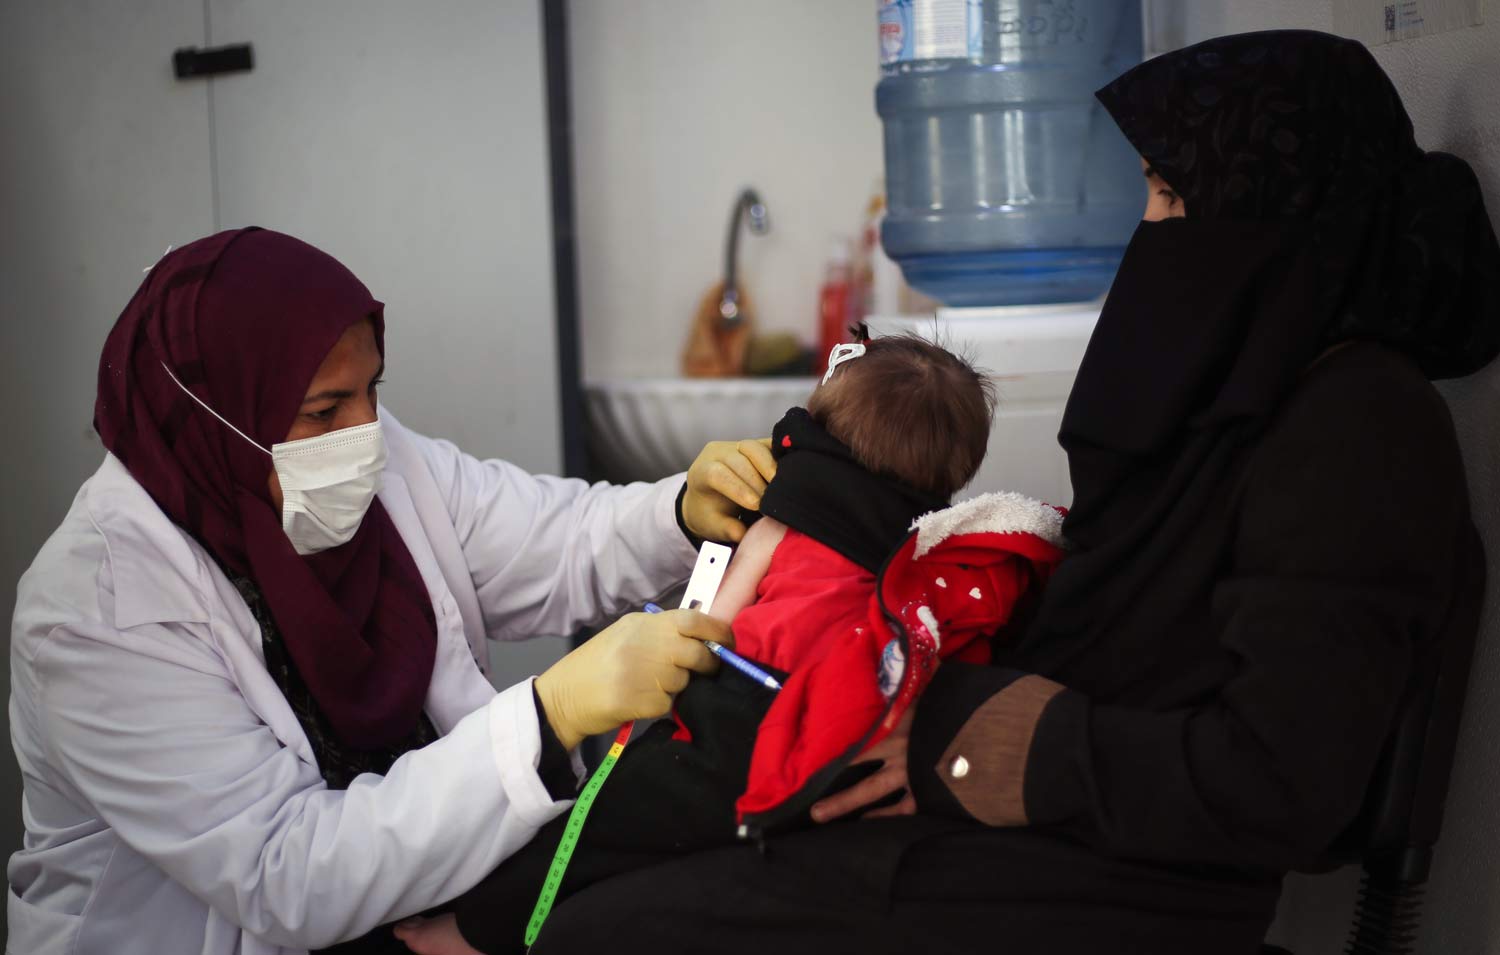 A doctor wearing a surgical mask examines a malnourished baby as her mother holds her.